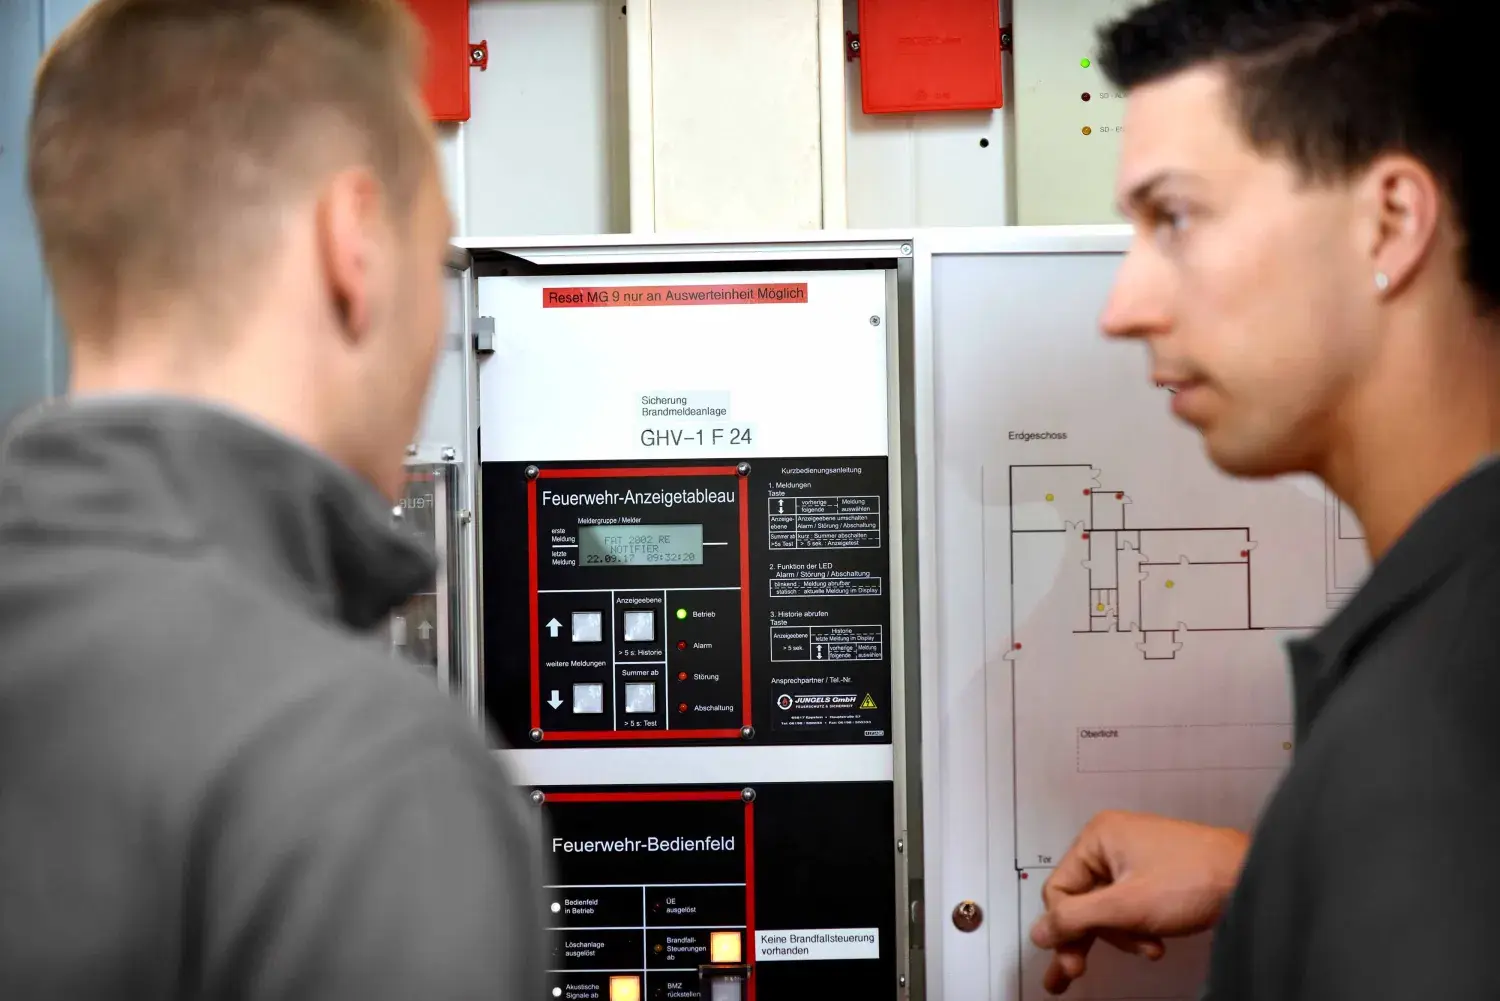 Two CWS service technicians look at a hazard detection system